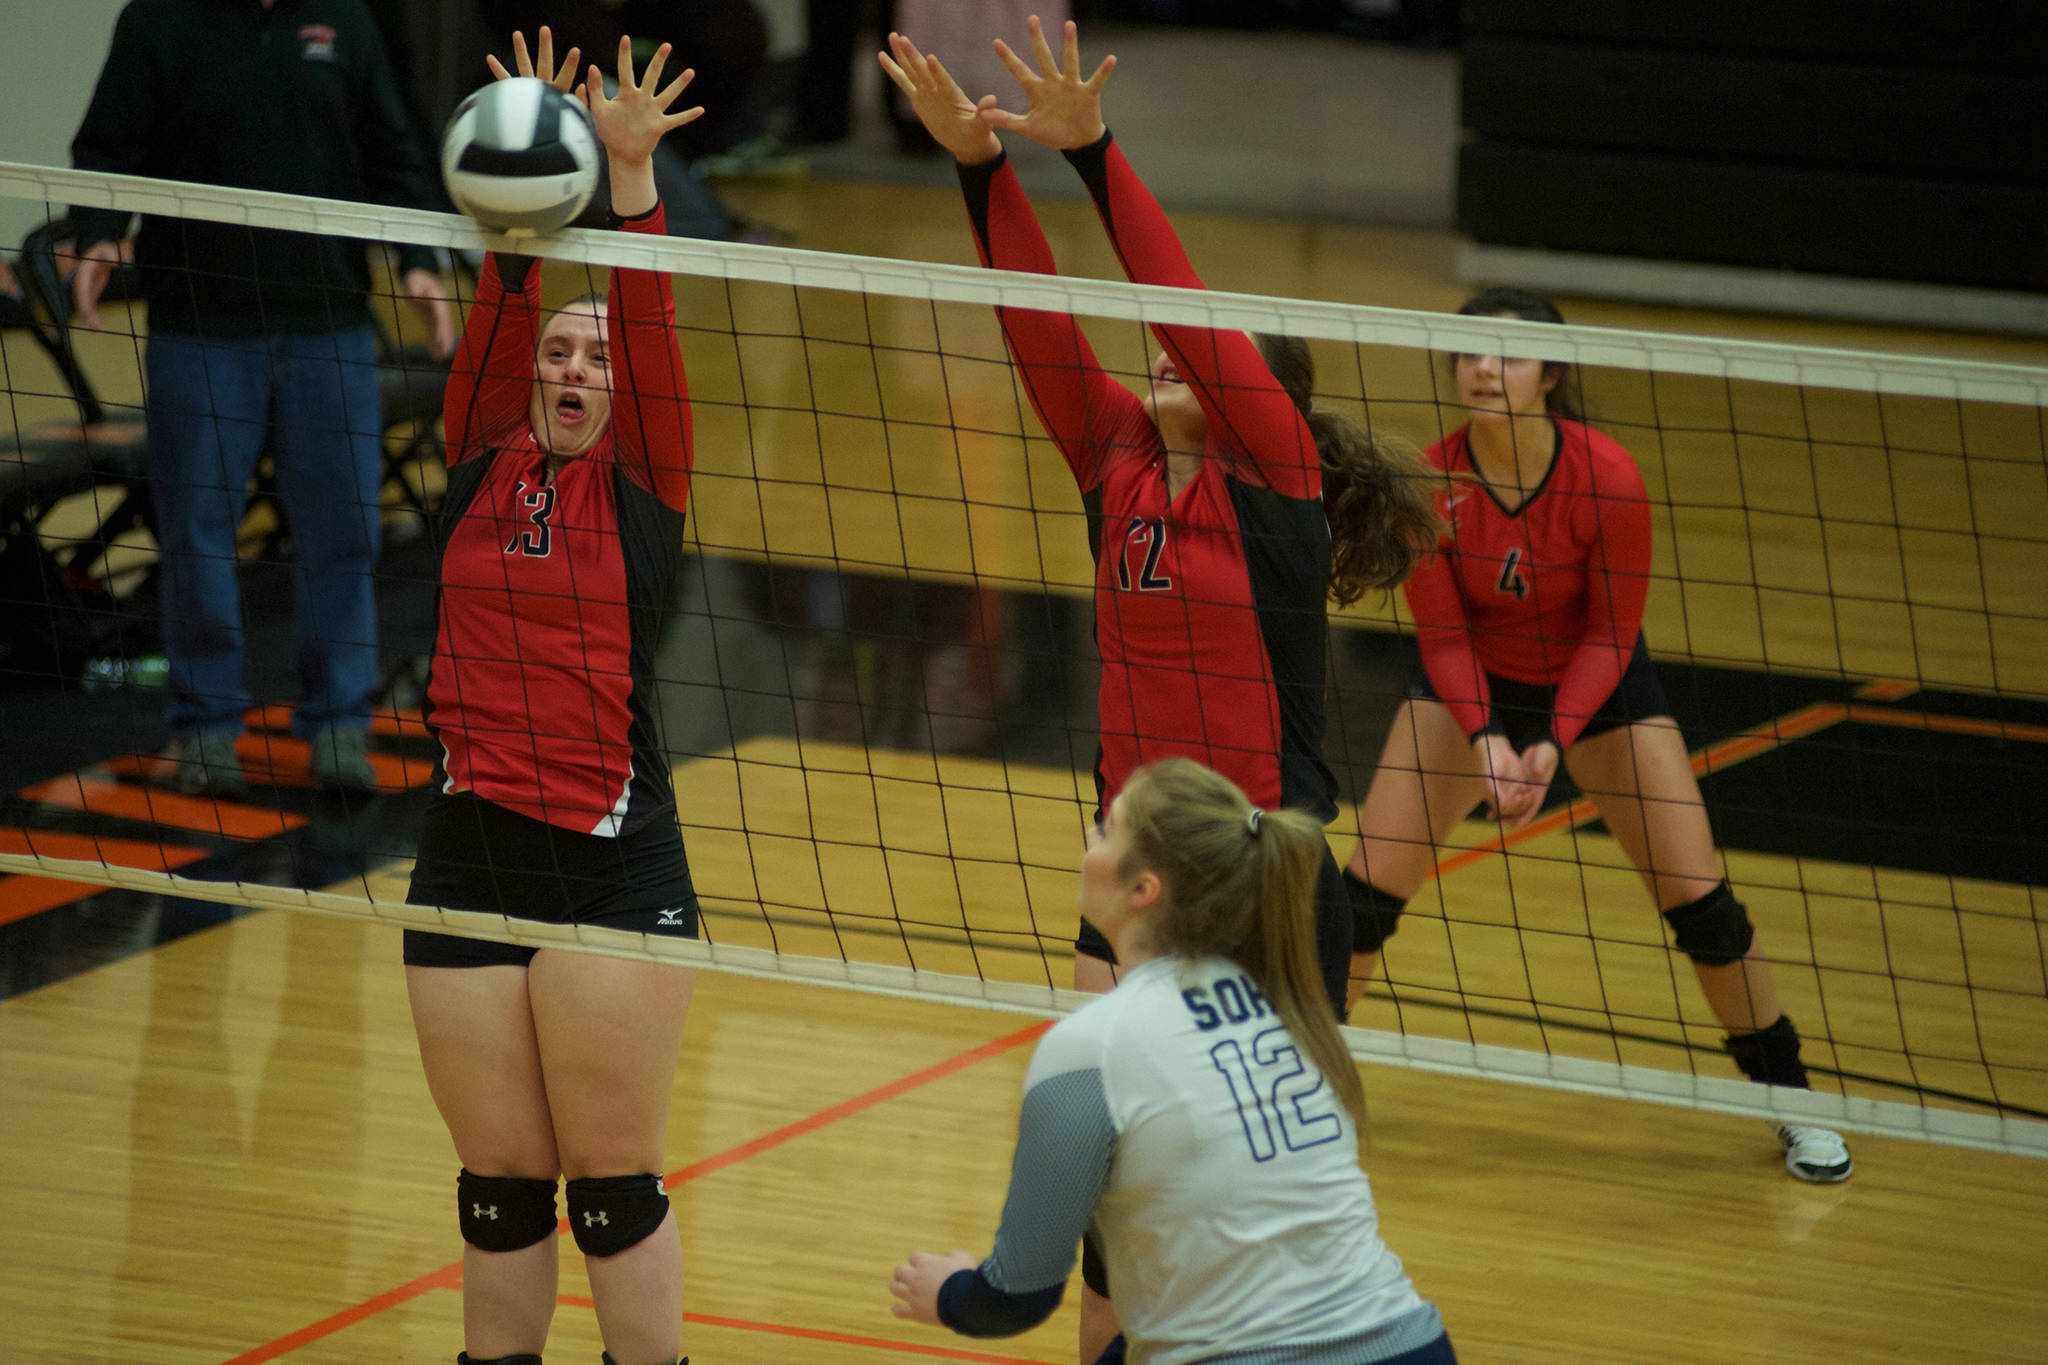 The Juneau-Douglas High School volleyball team plays in the state tournament in 2017. (Nolin Ainsworth | Juneau Empire)